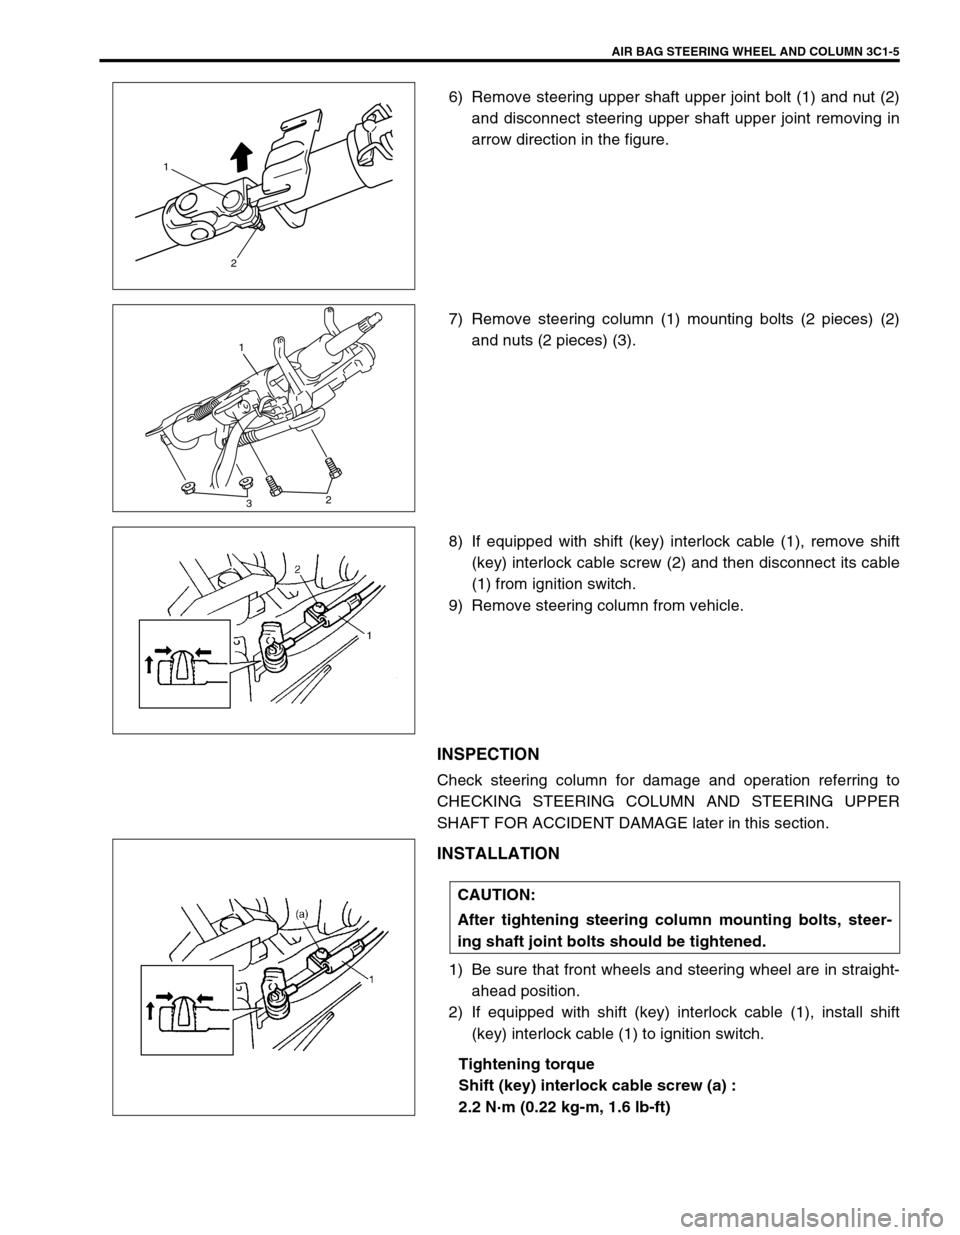 SUZUKI GRAND VITARA 1999 2.G Owners Manual AIR BAG STEERING WHEEL AND COLUMN 3C1-5
6) Remove steering upper shaft upper joint bolt (1) and nut (2)
and disconnect steering upper shaft upper joint removing in
arrow direction in the figure.
7) Re